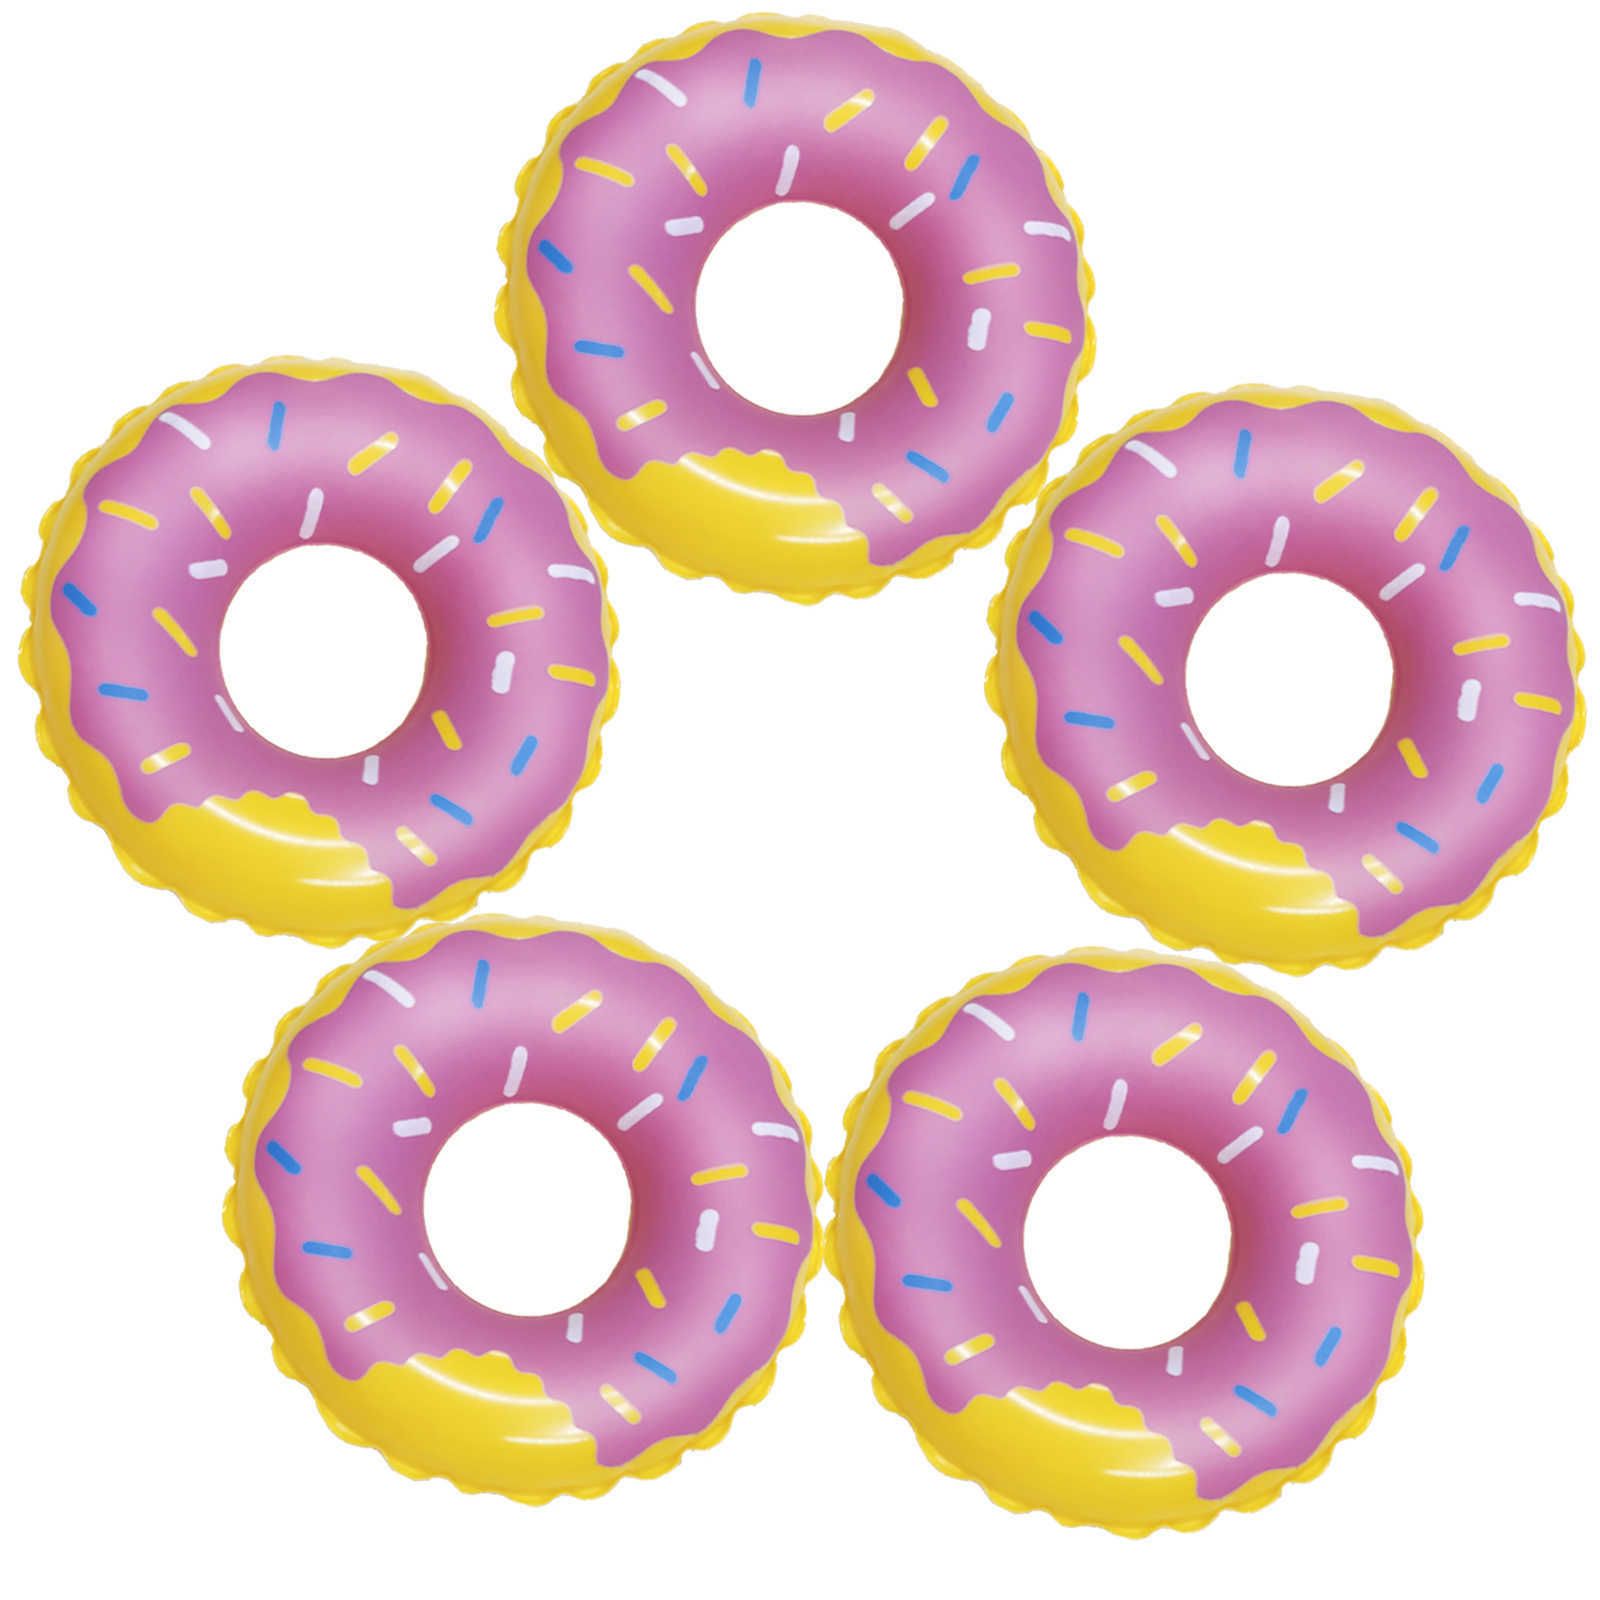 5 Donuts Pink